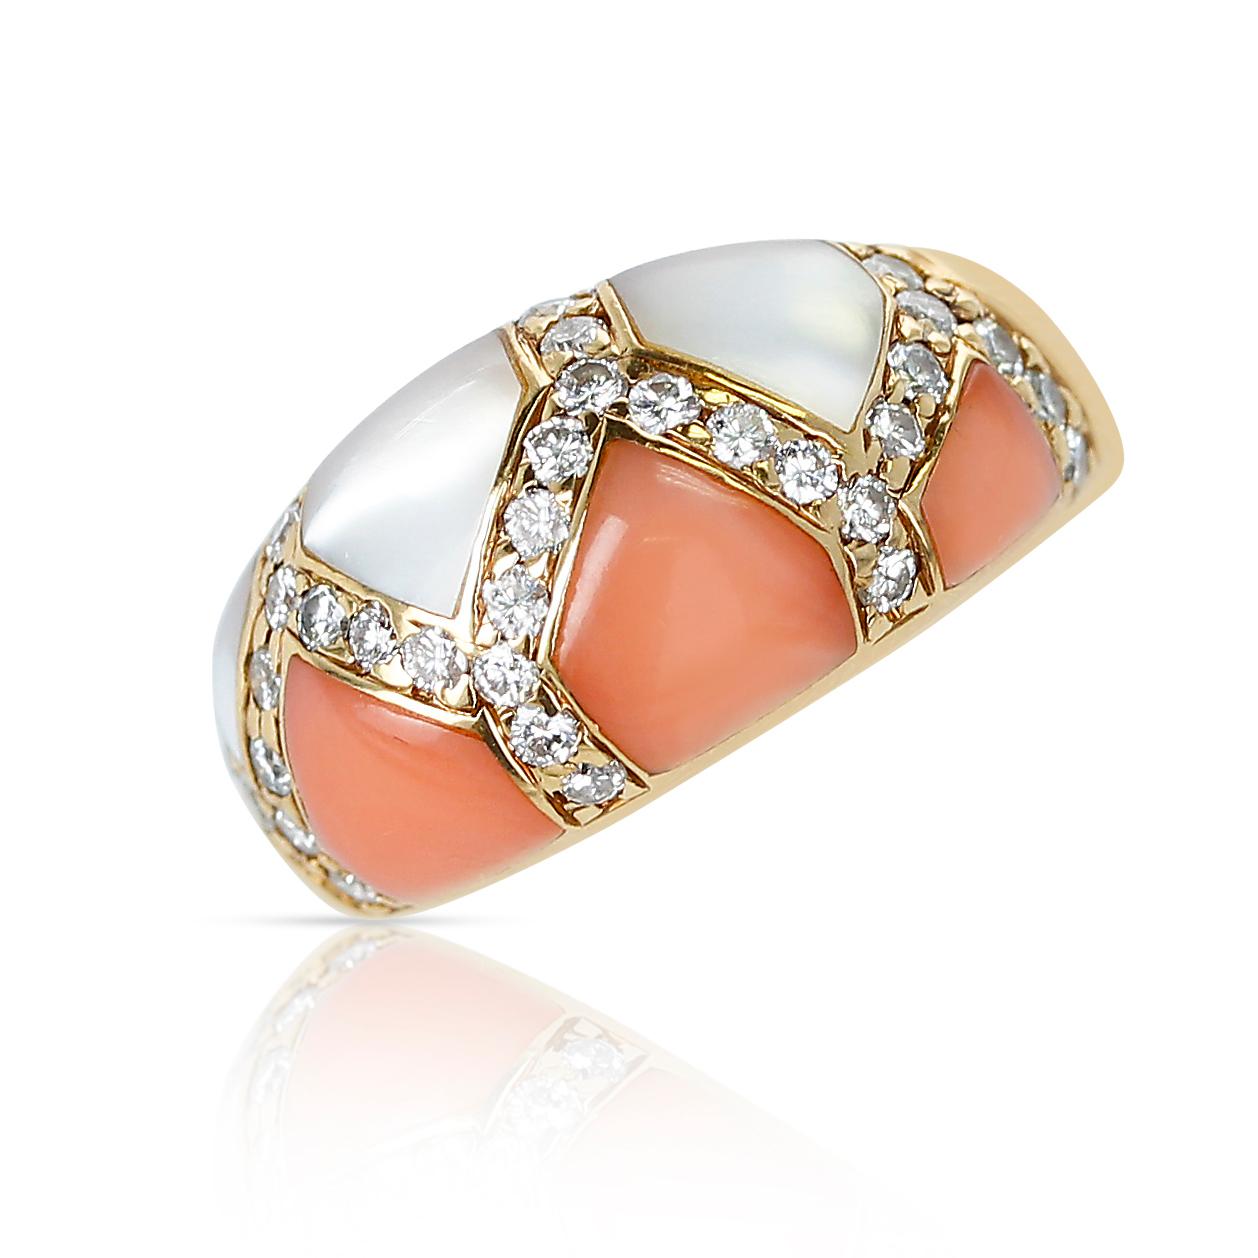 A Coral and Mother of Pearl Ring with Diamonds, made in 18 Karat Yellow Gold. The coral and mother of pearl are in pentagonal shapes. Ring Size US 6. Total weight: 8.45 grams.